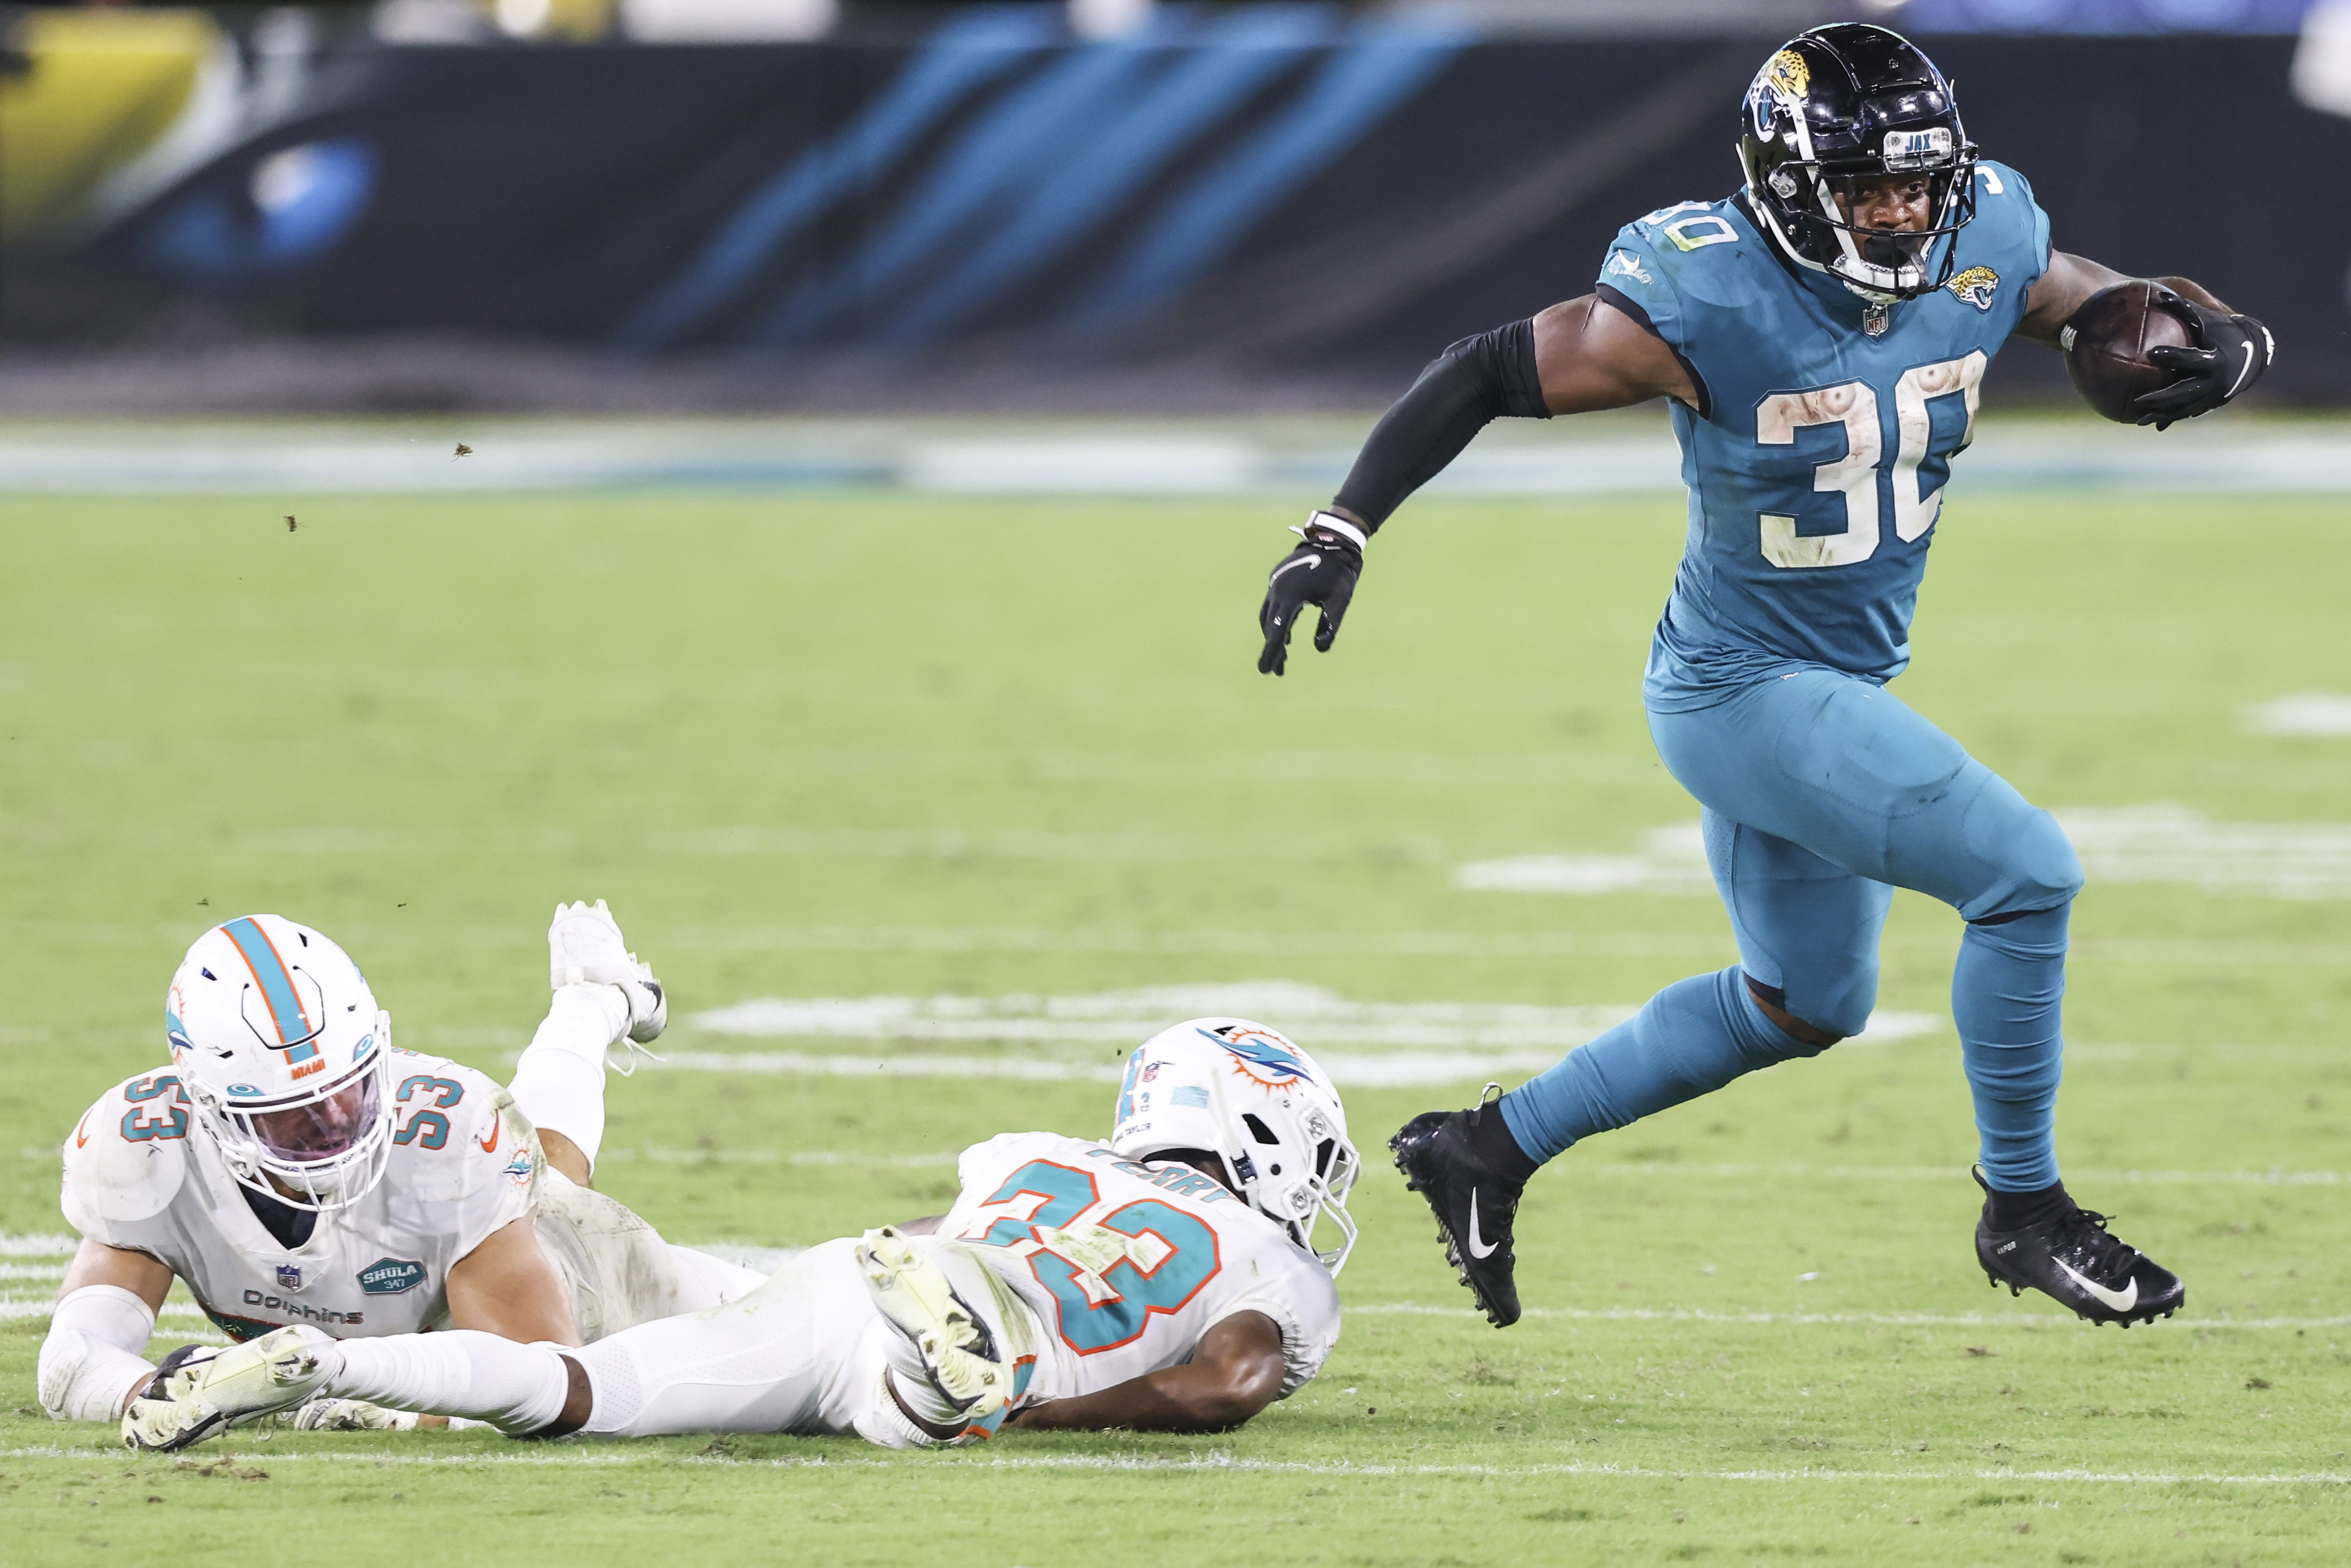 Jaguars RB James Robinson is re-energized and ready to enjoy more wins